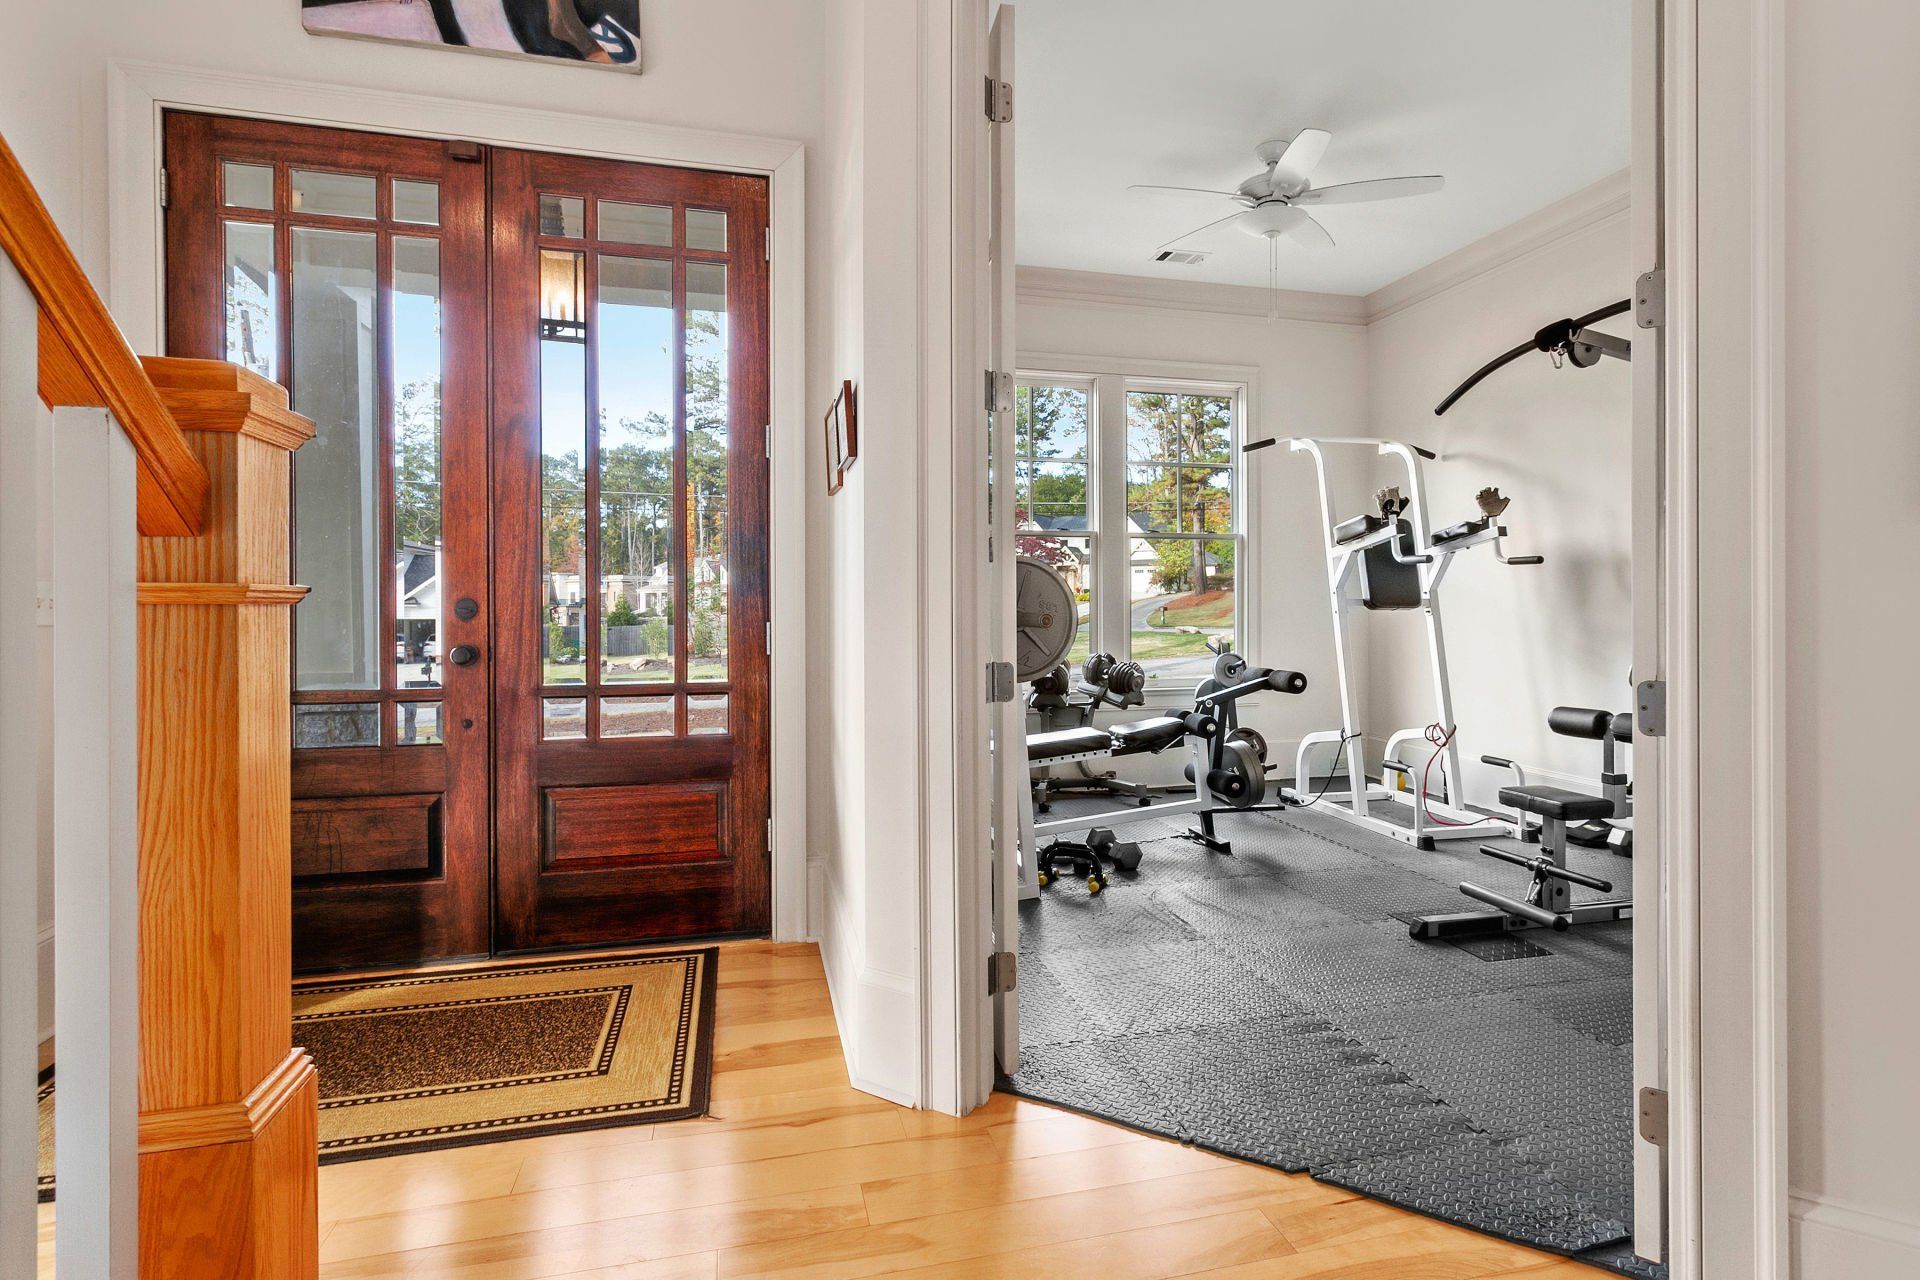 A hallway leading to a gym in a house.